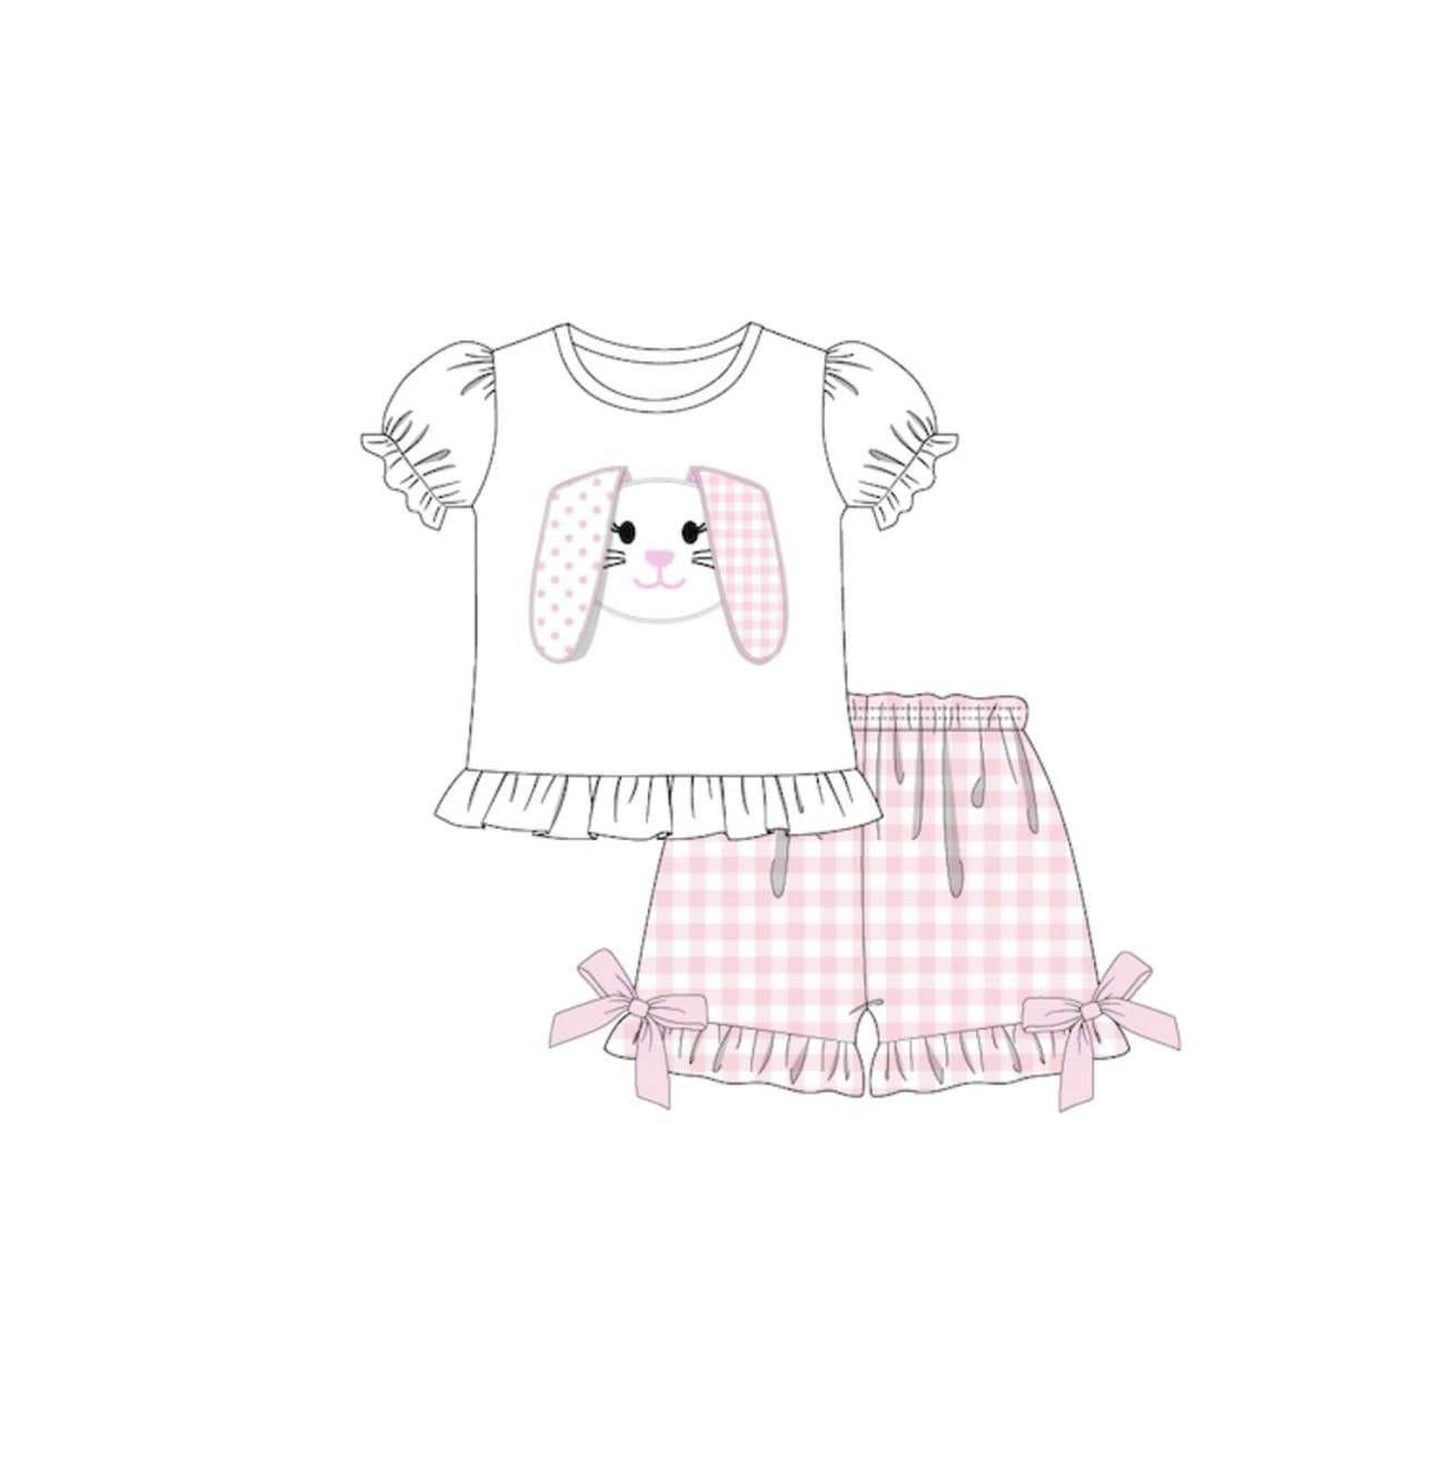 Baby Girls Easter Rabbit Ears shorts sets